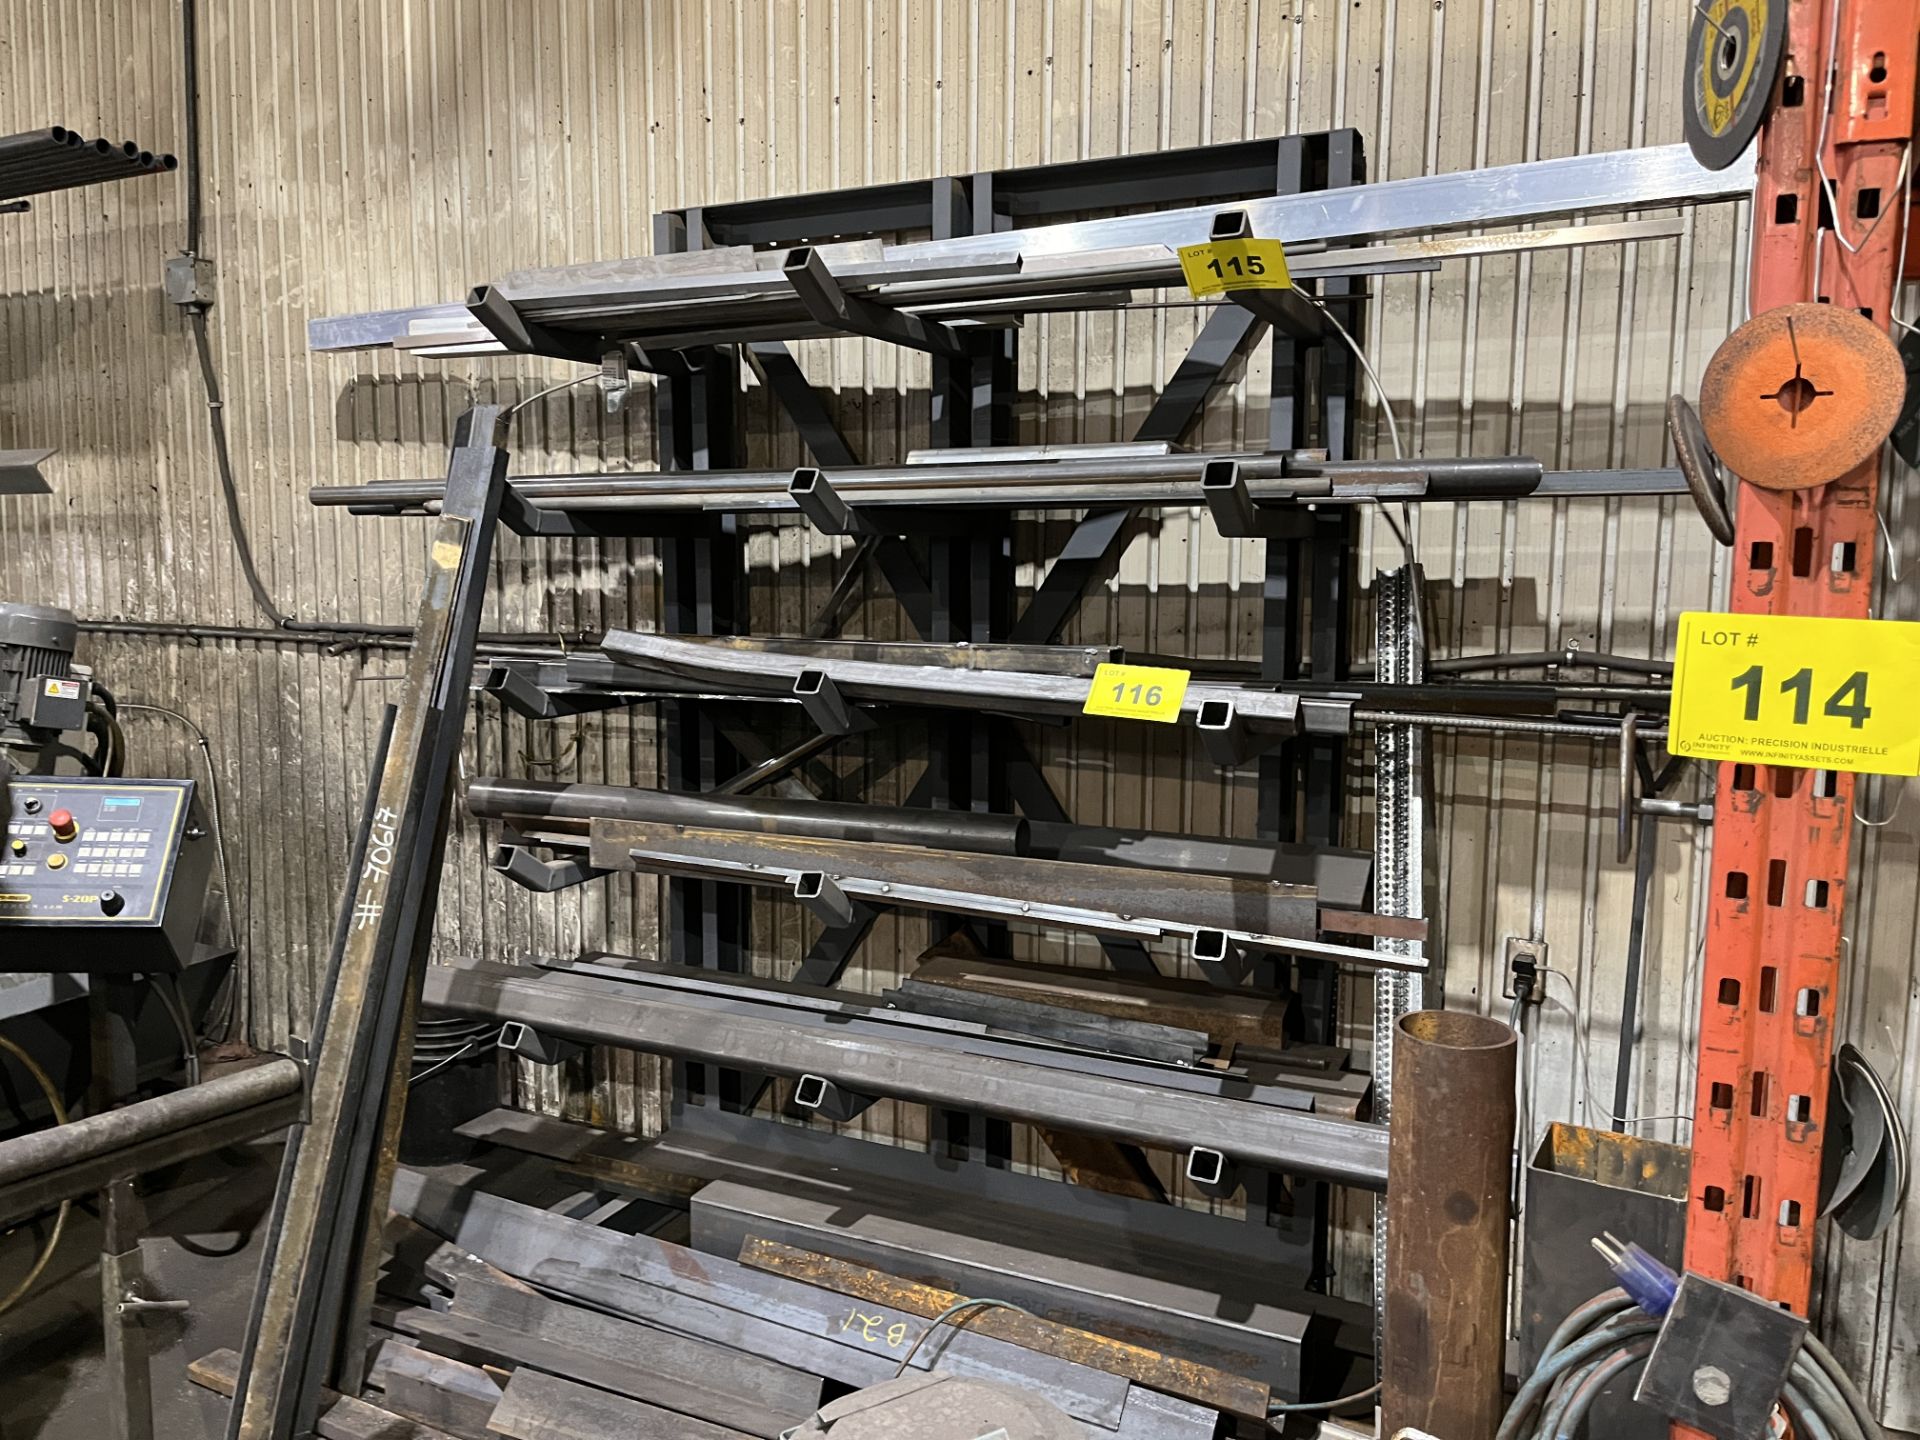 CONTENTS OF CANTILEVER RACK INCLUDING STEEL BAR STOCK, ETC. (NO RACK)